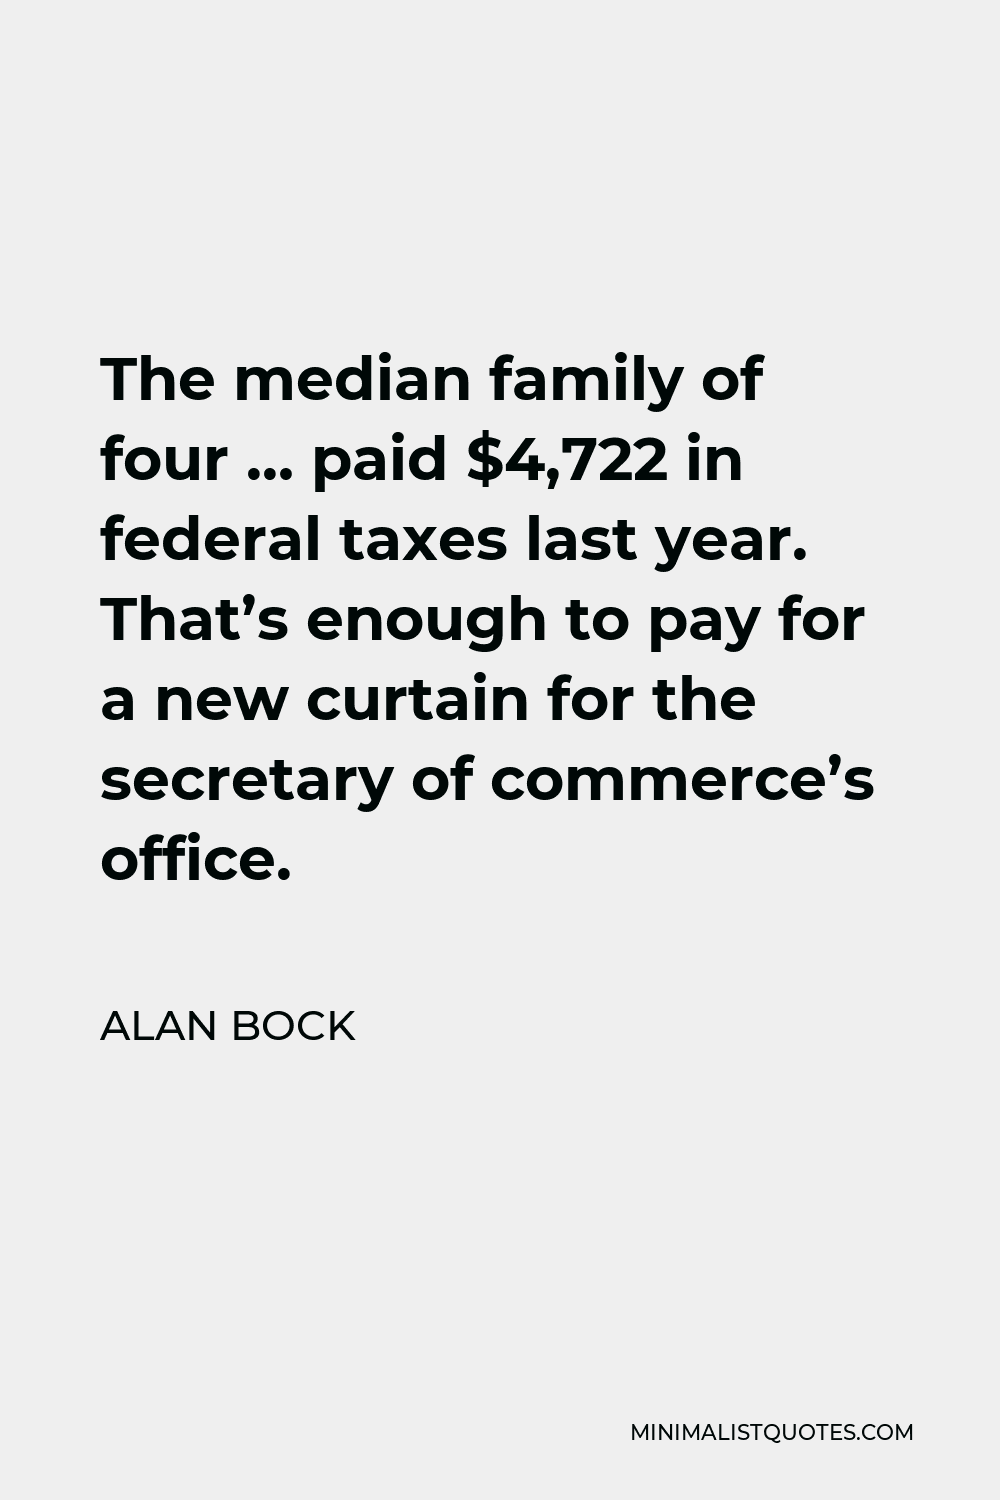 Alan Bock Quote - The median family of four … paid $4,722 in federal taxes last year. That’s enough to pay for a new curtain for the secretary of commerce’s office.